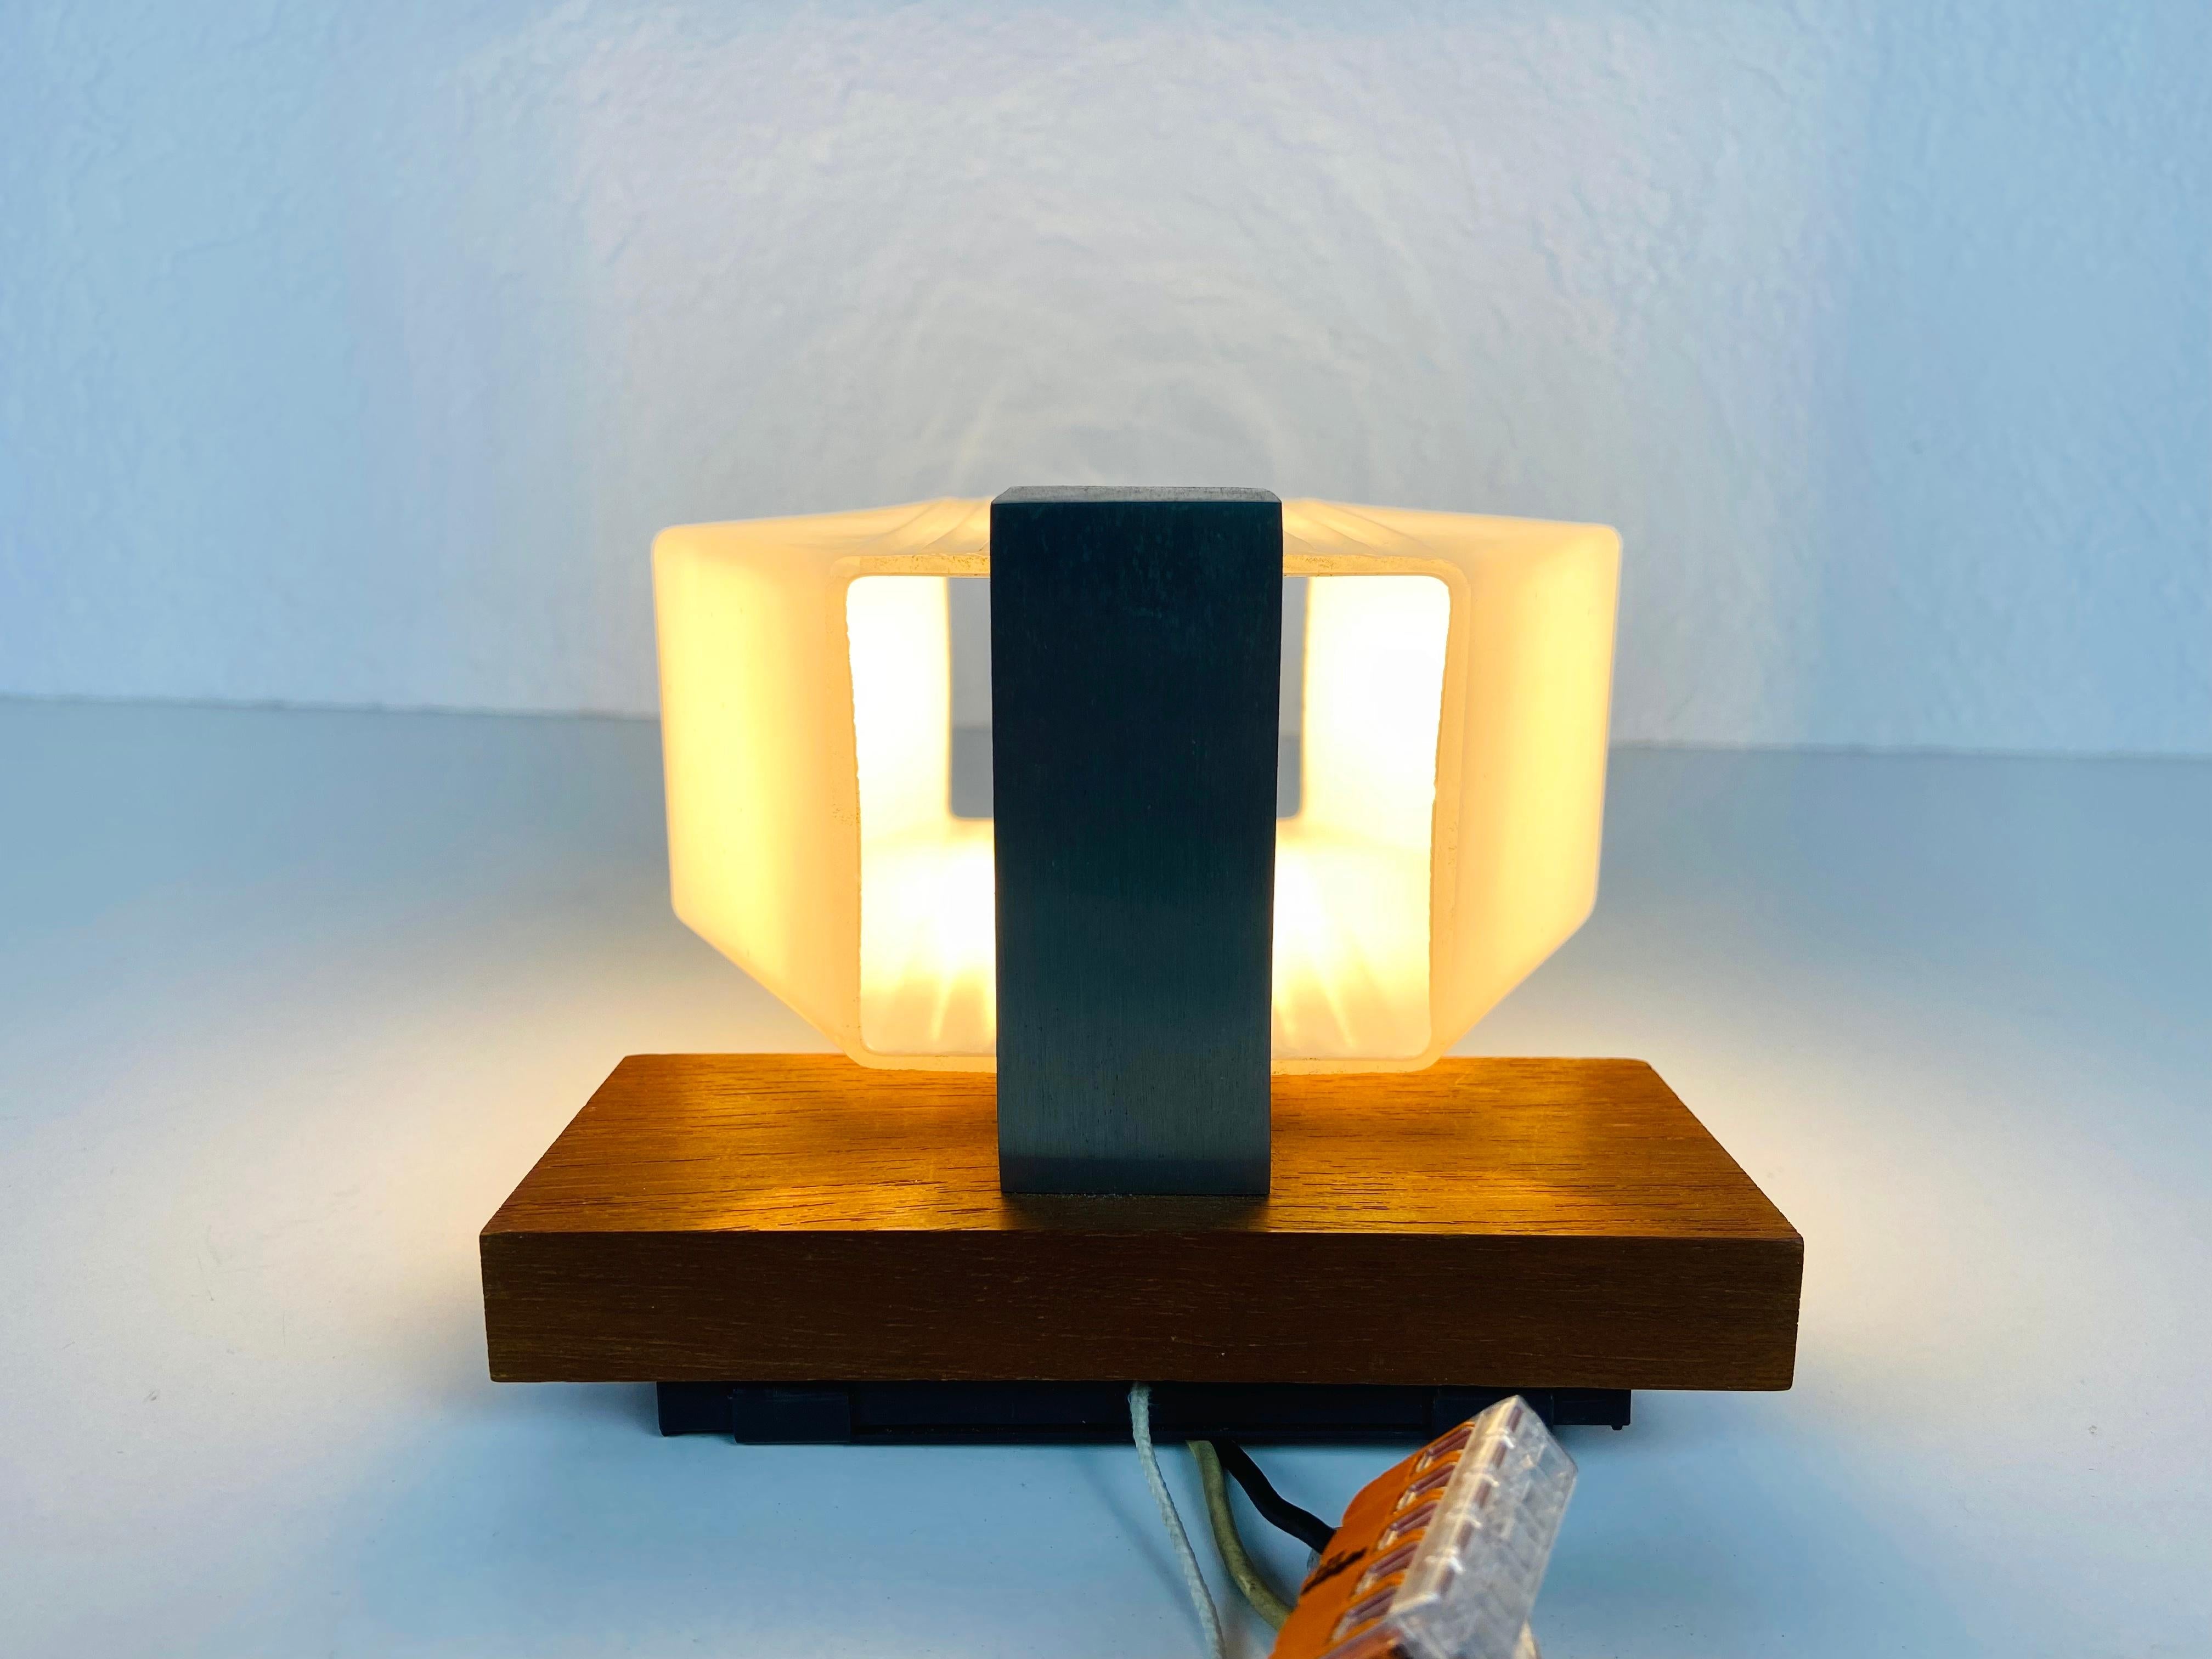 Pair of White Opal Glass and Teak Wall Lamps, 1970s, Germany For Sale 2